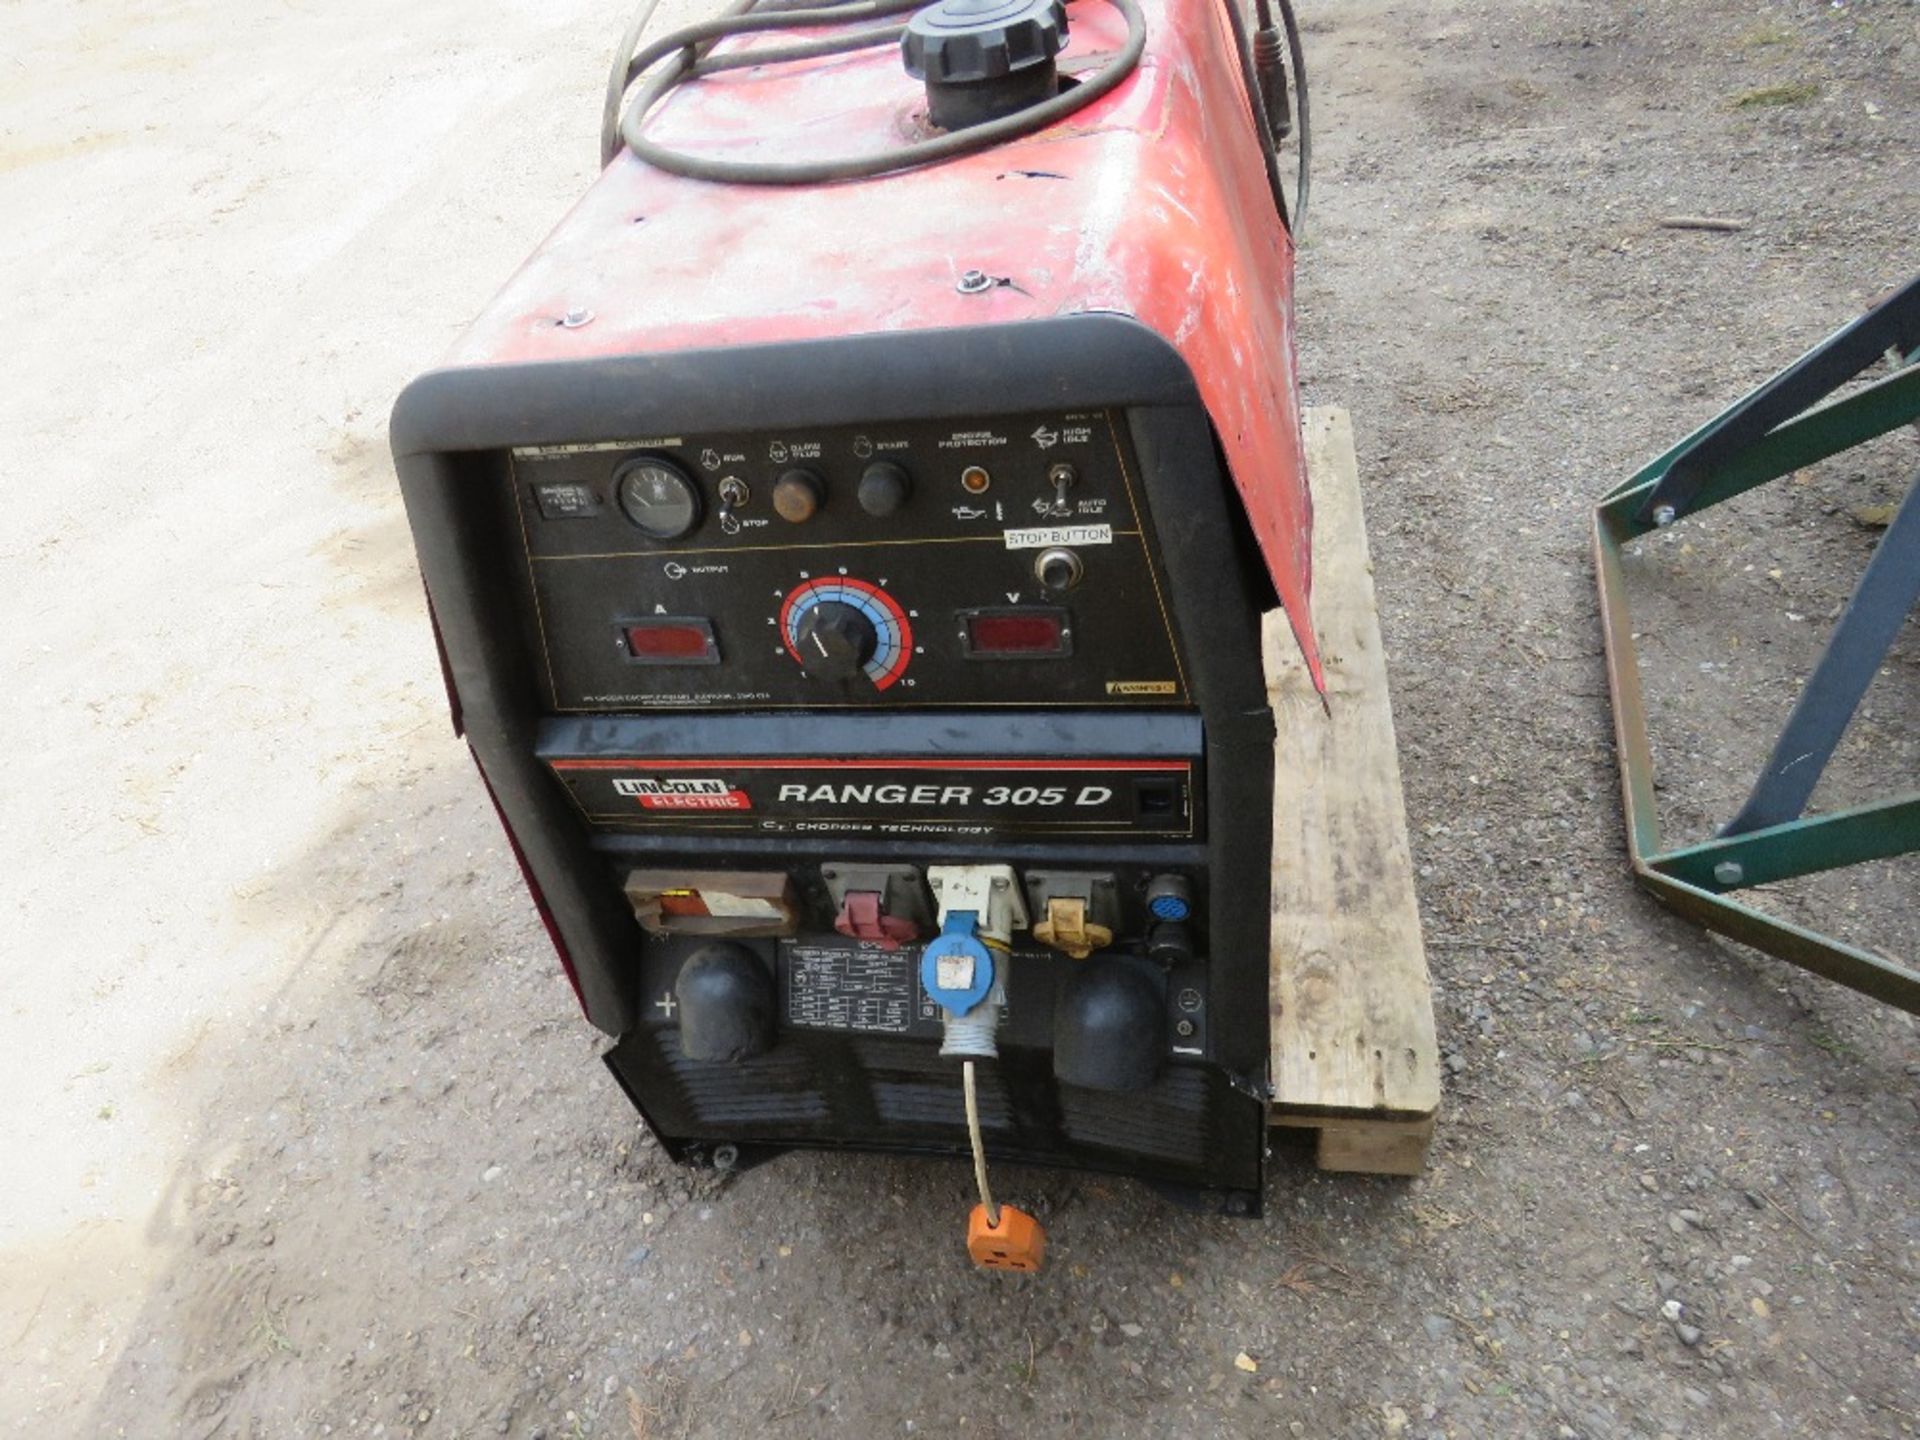 LINCOLN RANGER 305D DIESEL ENGINED WELDER GENERATOR SET WITH LEADS. SOURCED FROM COMPANY LIQUIDATION - Image 4 of 8